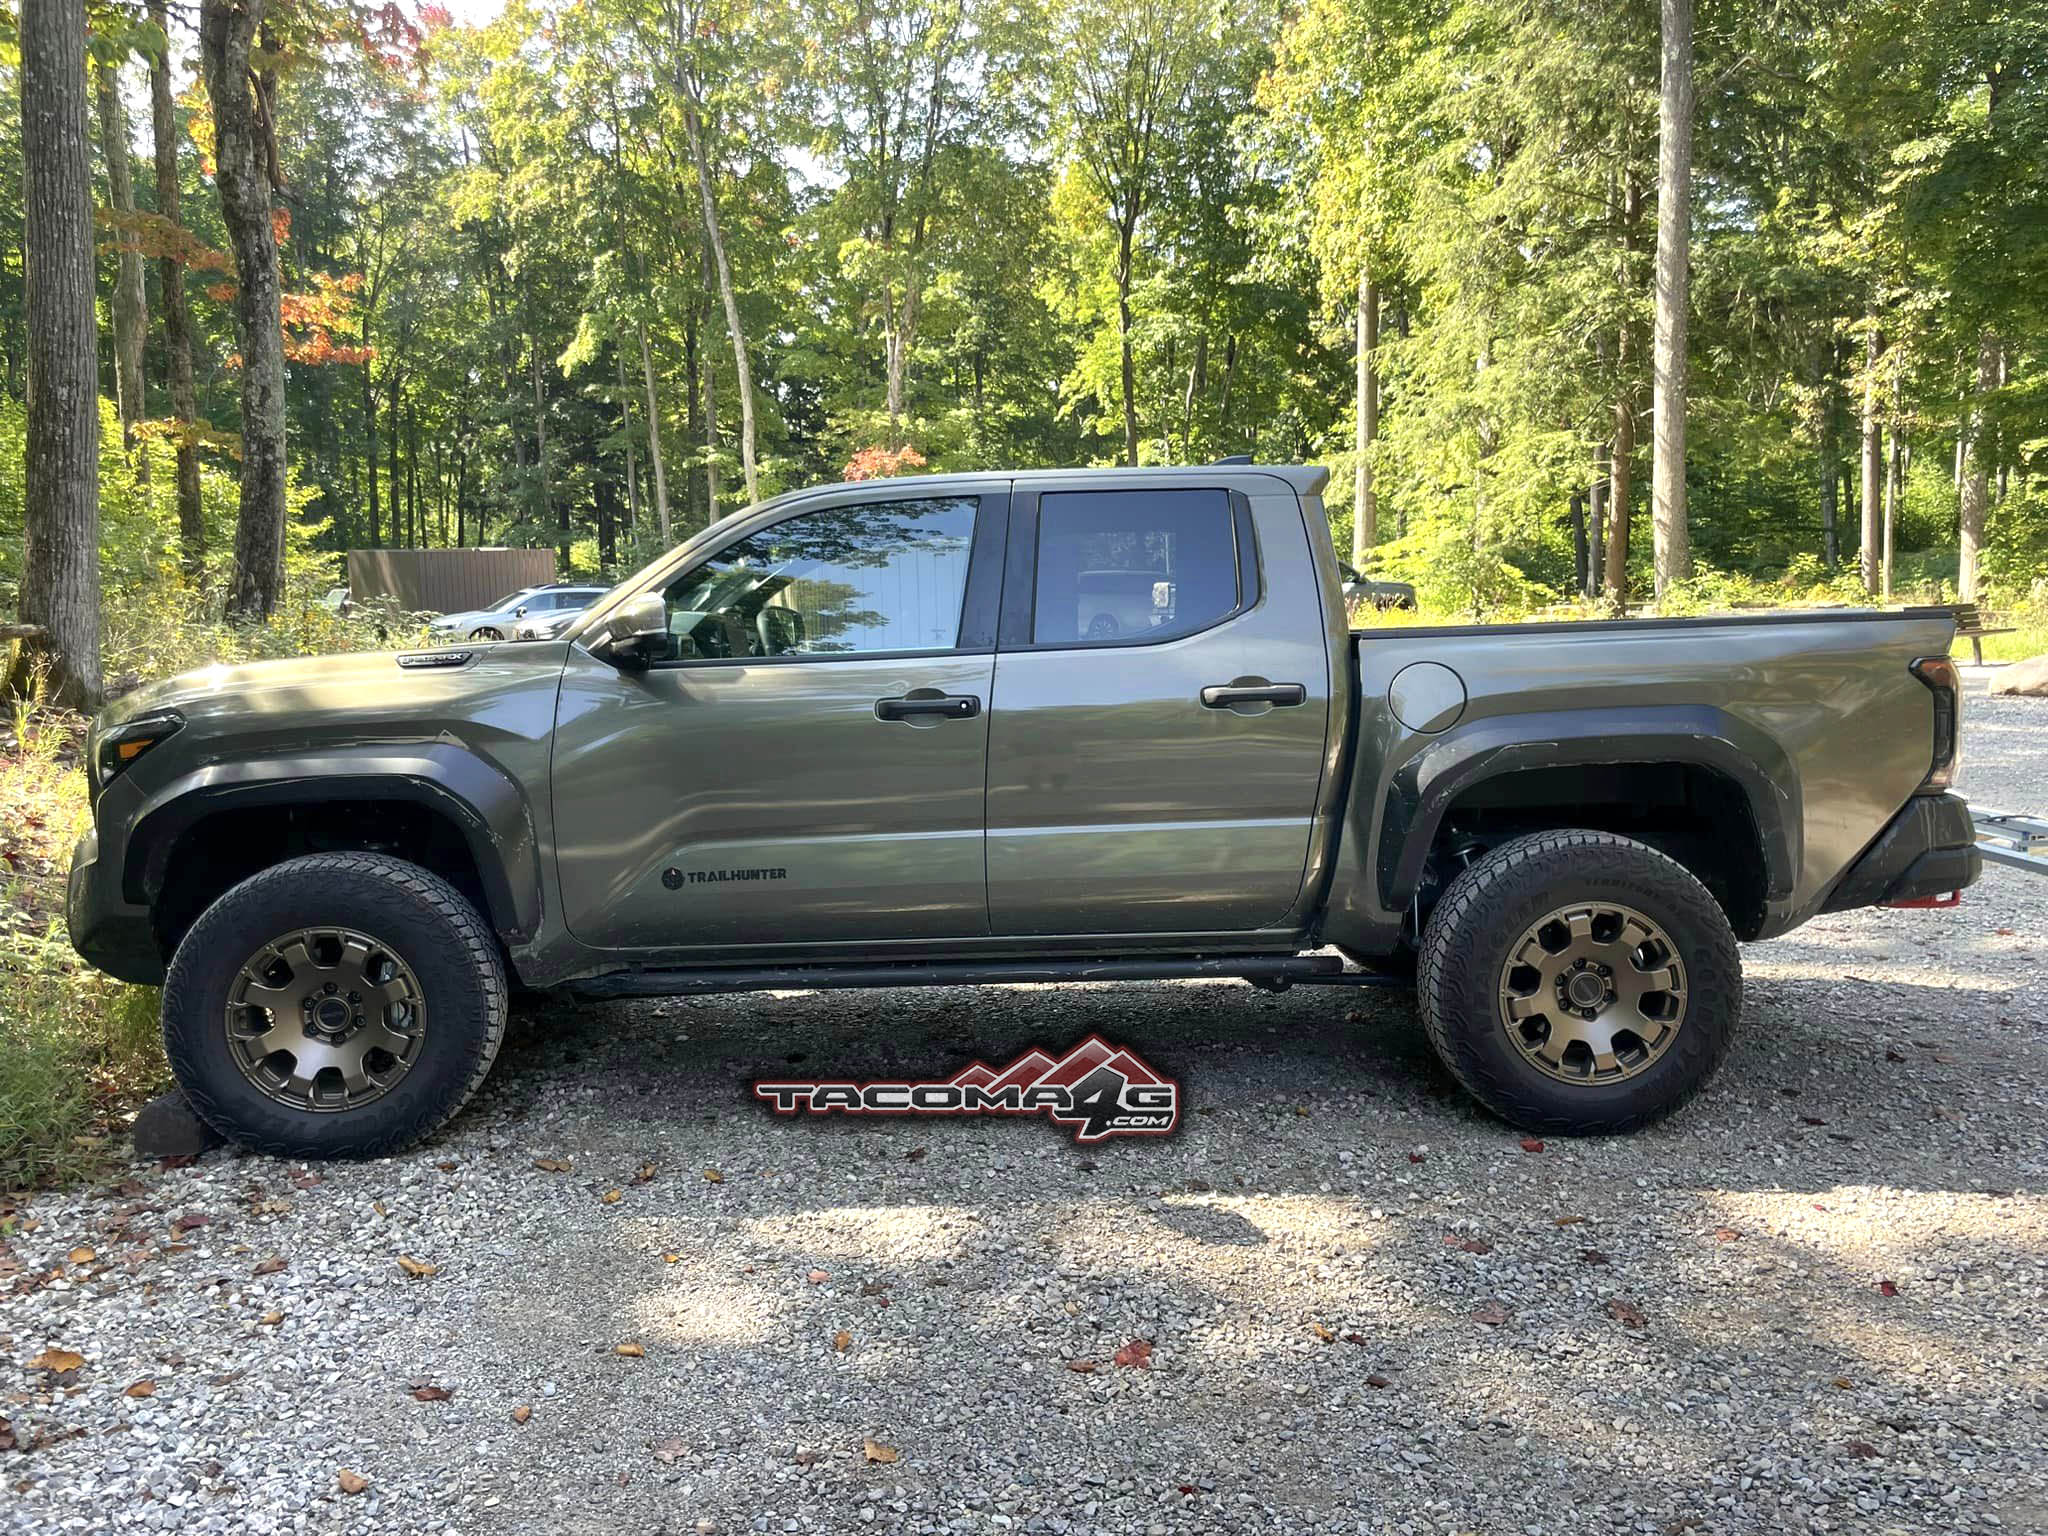 2024 Tacoma Official BRONZE OXIDE 2024 Tacoma Thread (4th Gen) 5 foot Short Bed 2024 Toyota Tacoma Trail hunter Bronze Oxide 2